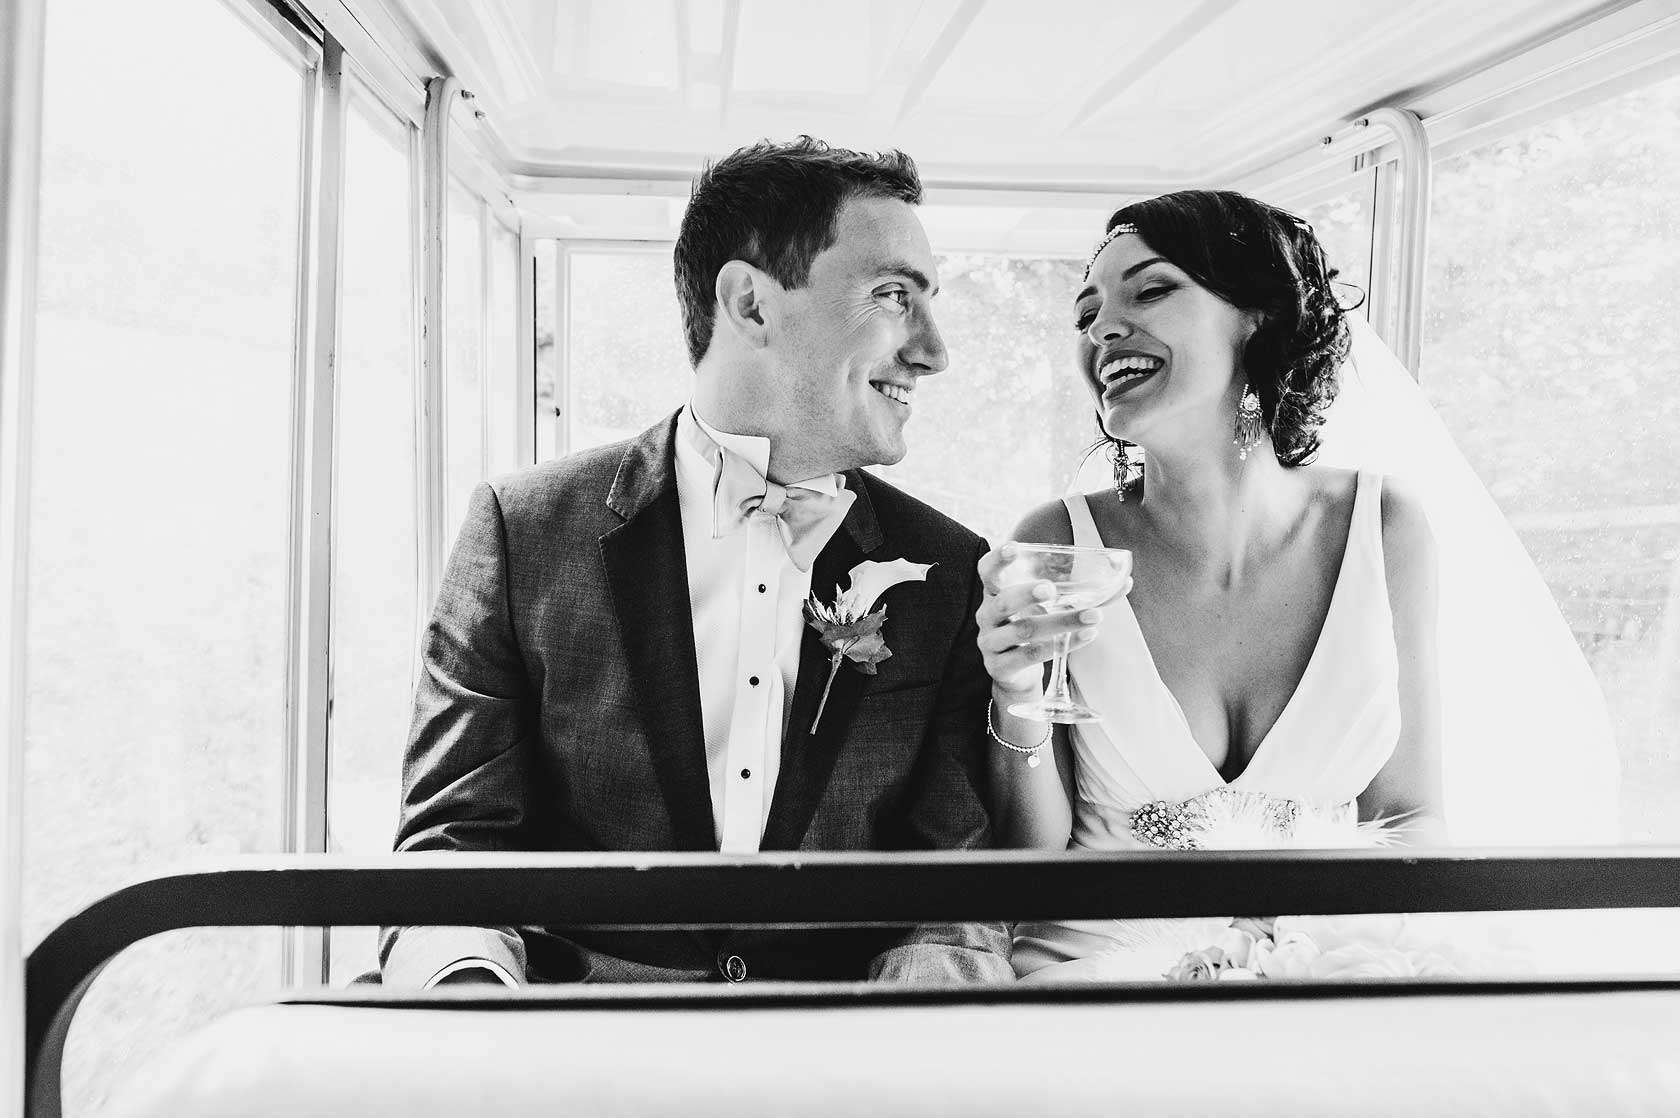 Reportage Wedding Photography at Blenheim Palace